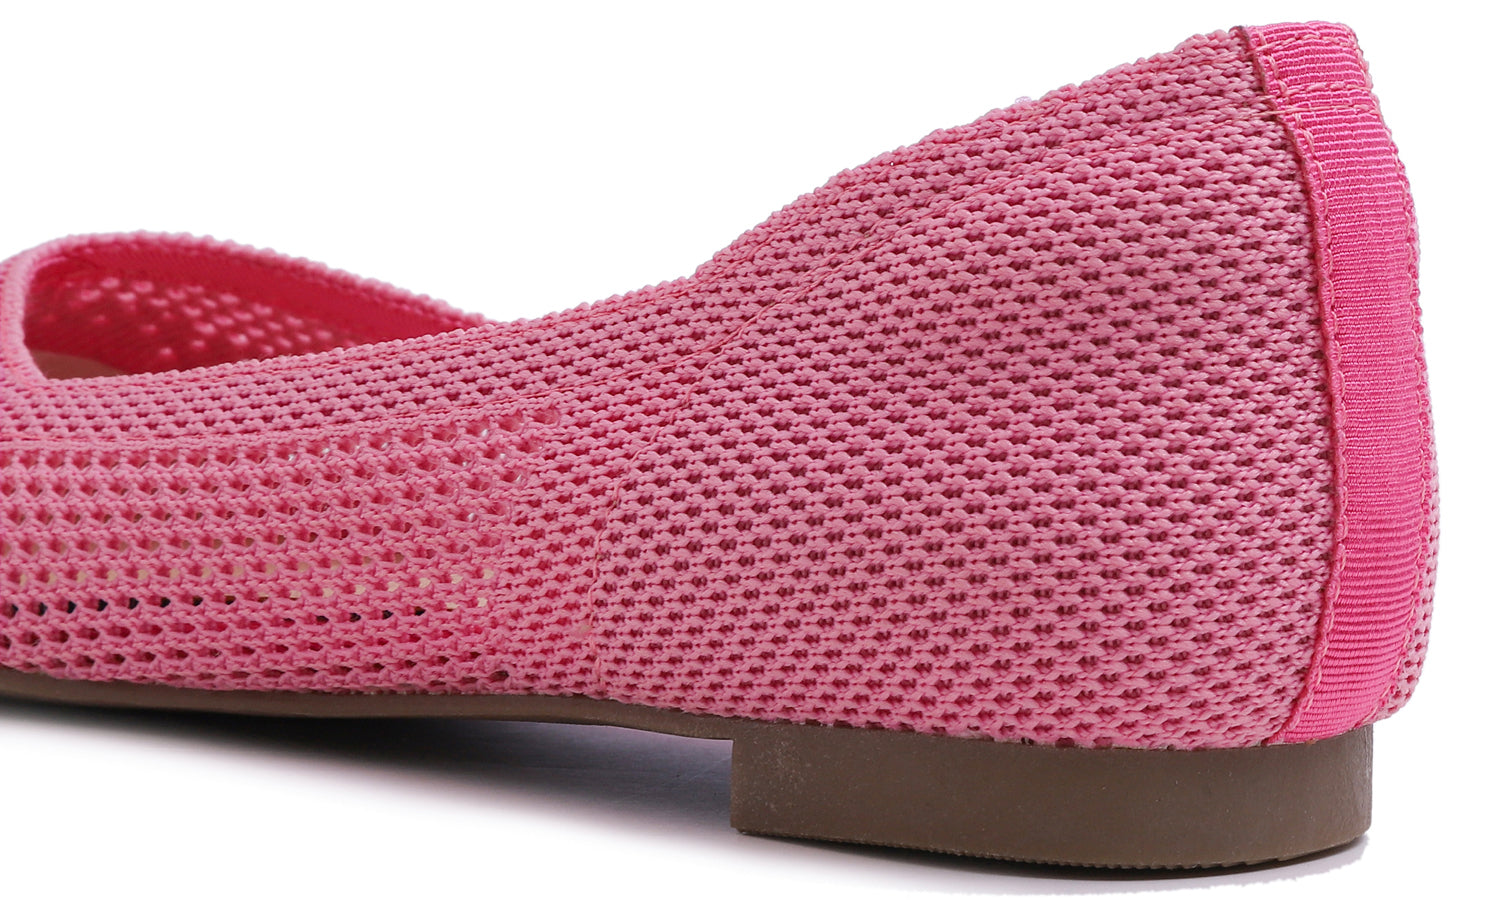 Feversole Women's Woven Fashion Breathable Knit Flat Shoes Pointed Hot Pink